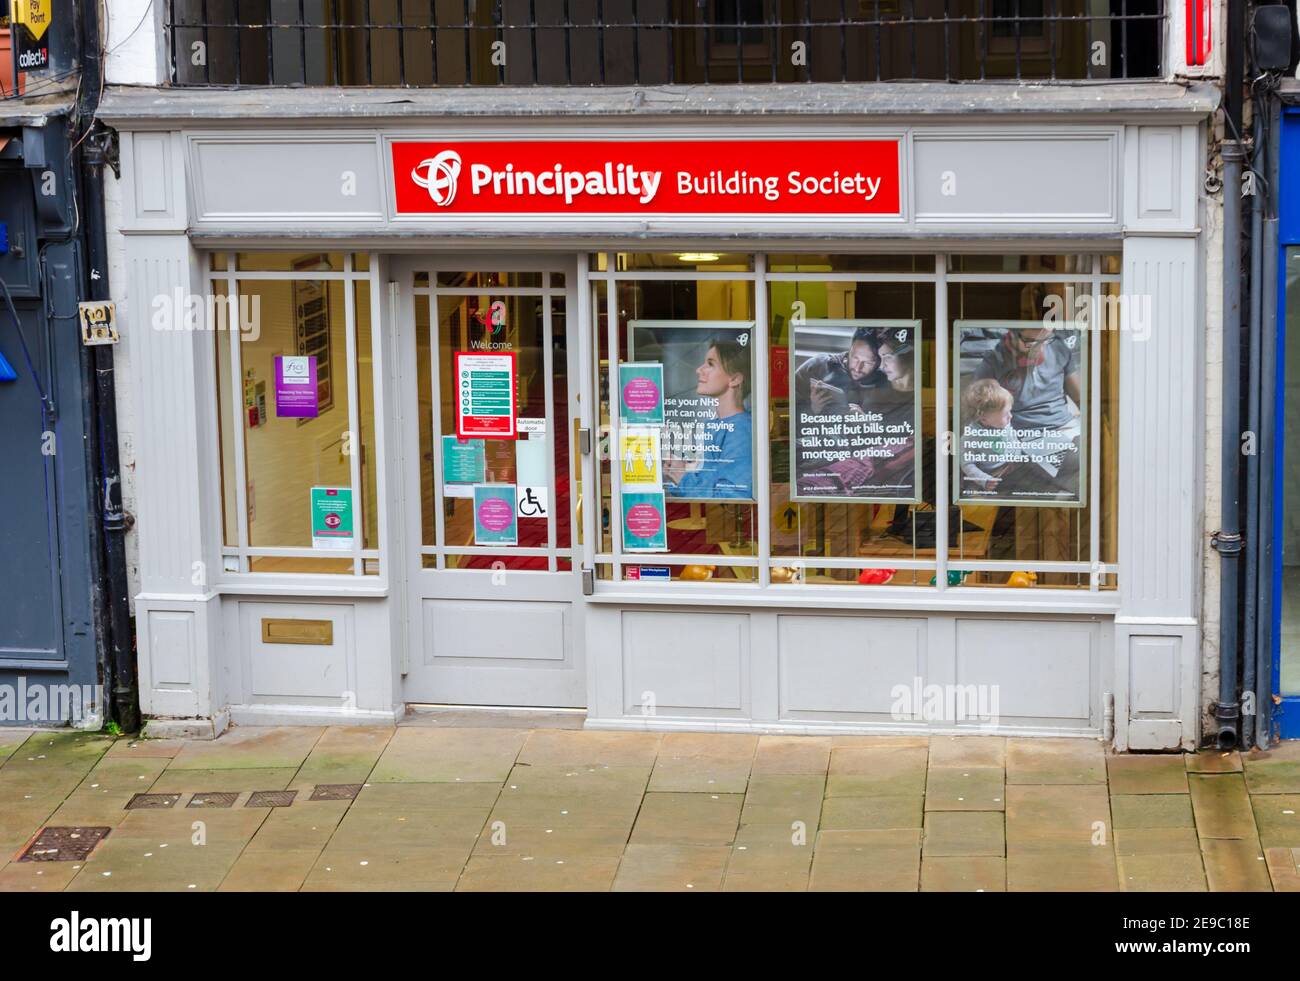 Chester; UK: Jan 29, 2021: The Principality Building Society office remains open during the lockdown. Banks and building societies are classed as esse Stock Photo